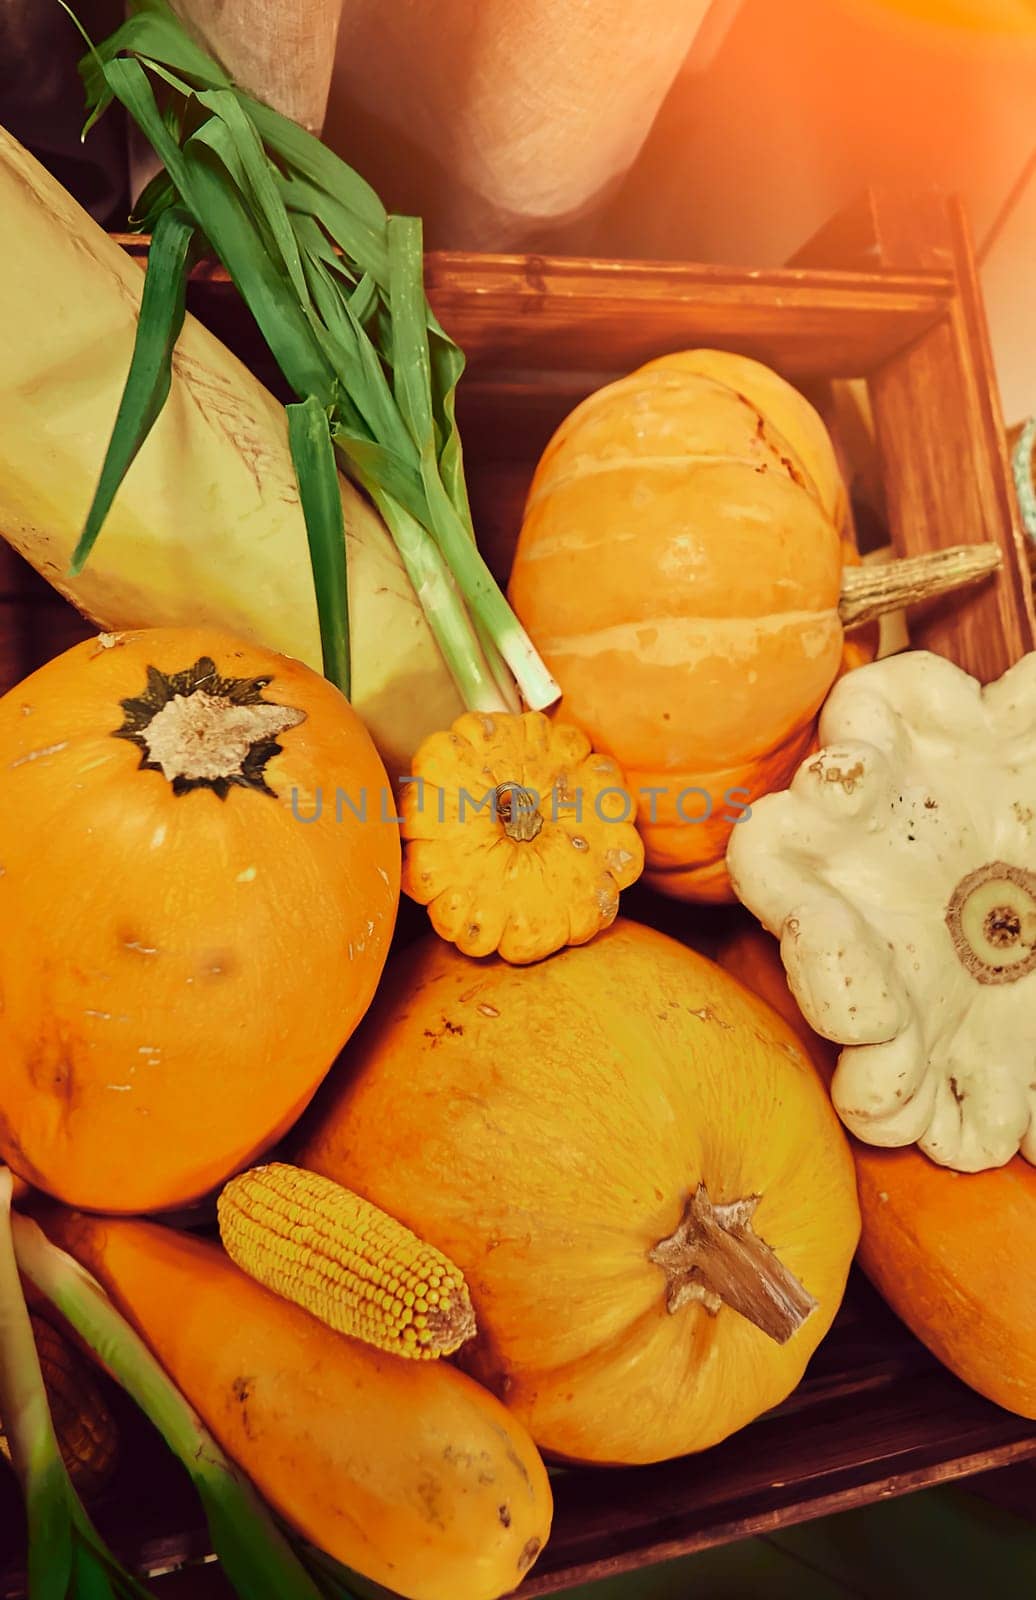 Autumn harvest, pumpkins, zucchini and green onions. by Hil